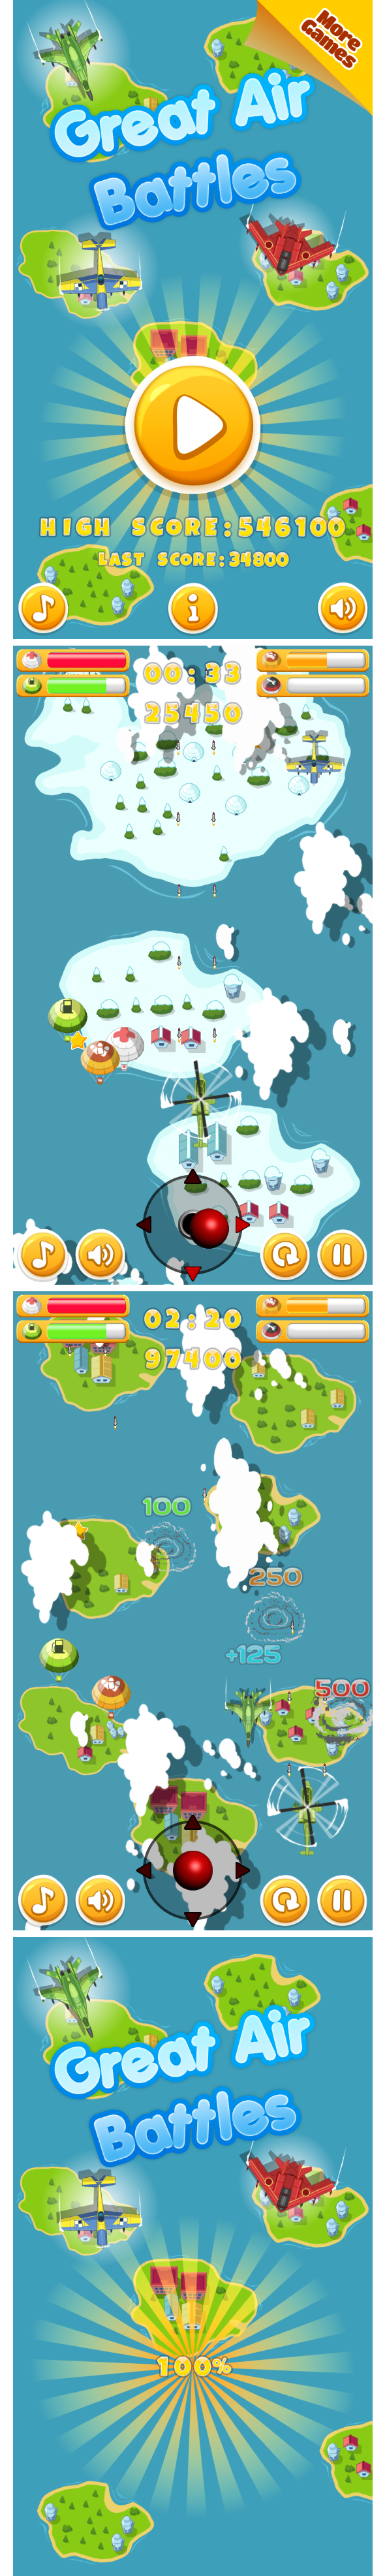 Great Air Battles - HTML5 Mobile Game (Construct 3 | Construct 2 | Capx) - 1